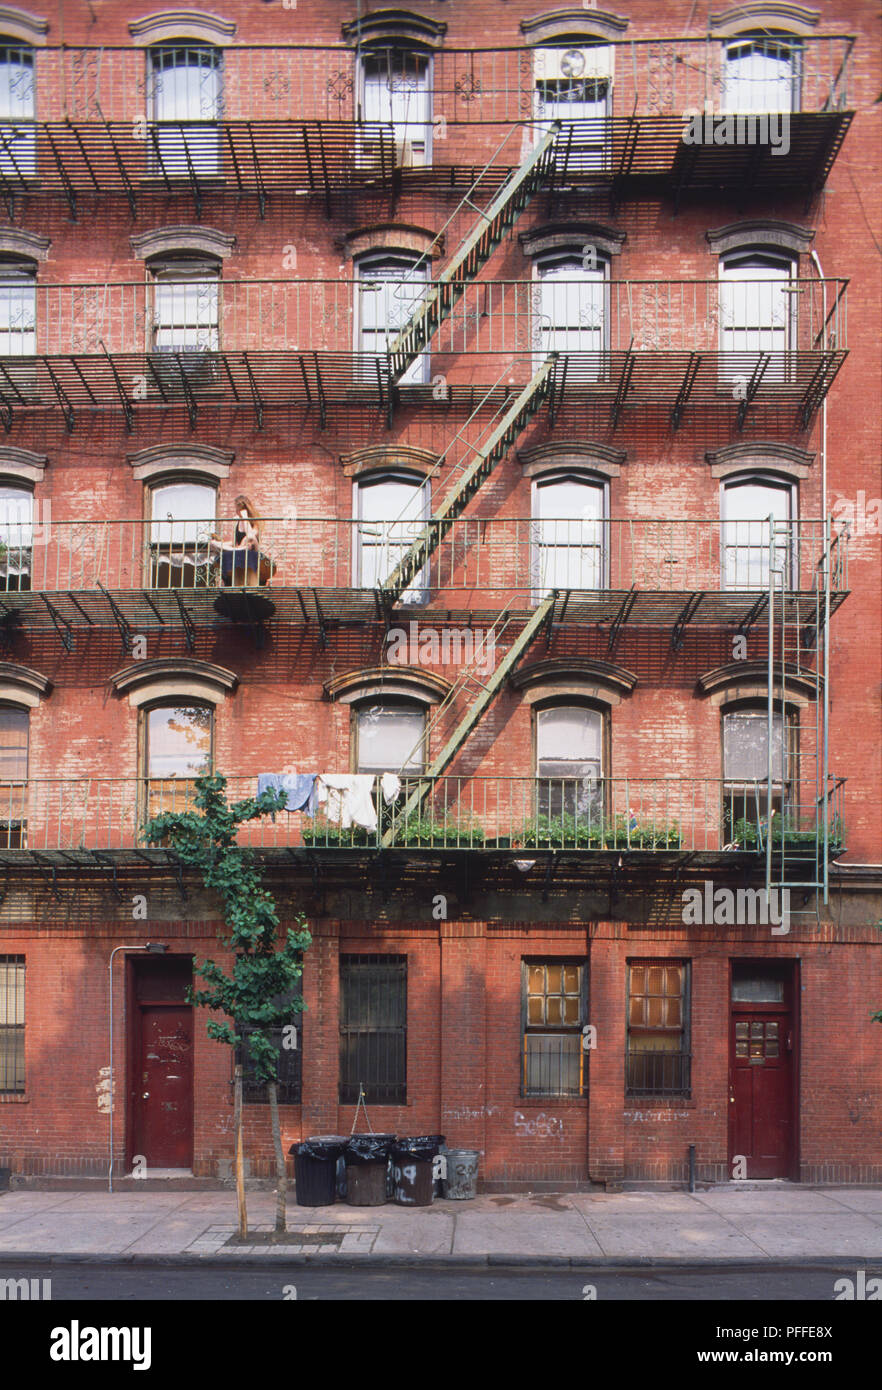 USA, New York, Manhattan, Lower East Side, facade of red-brick tenement block with external staircases. Stock Photo